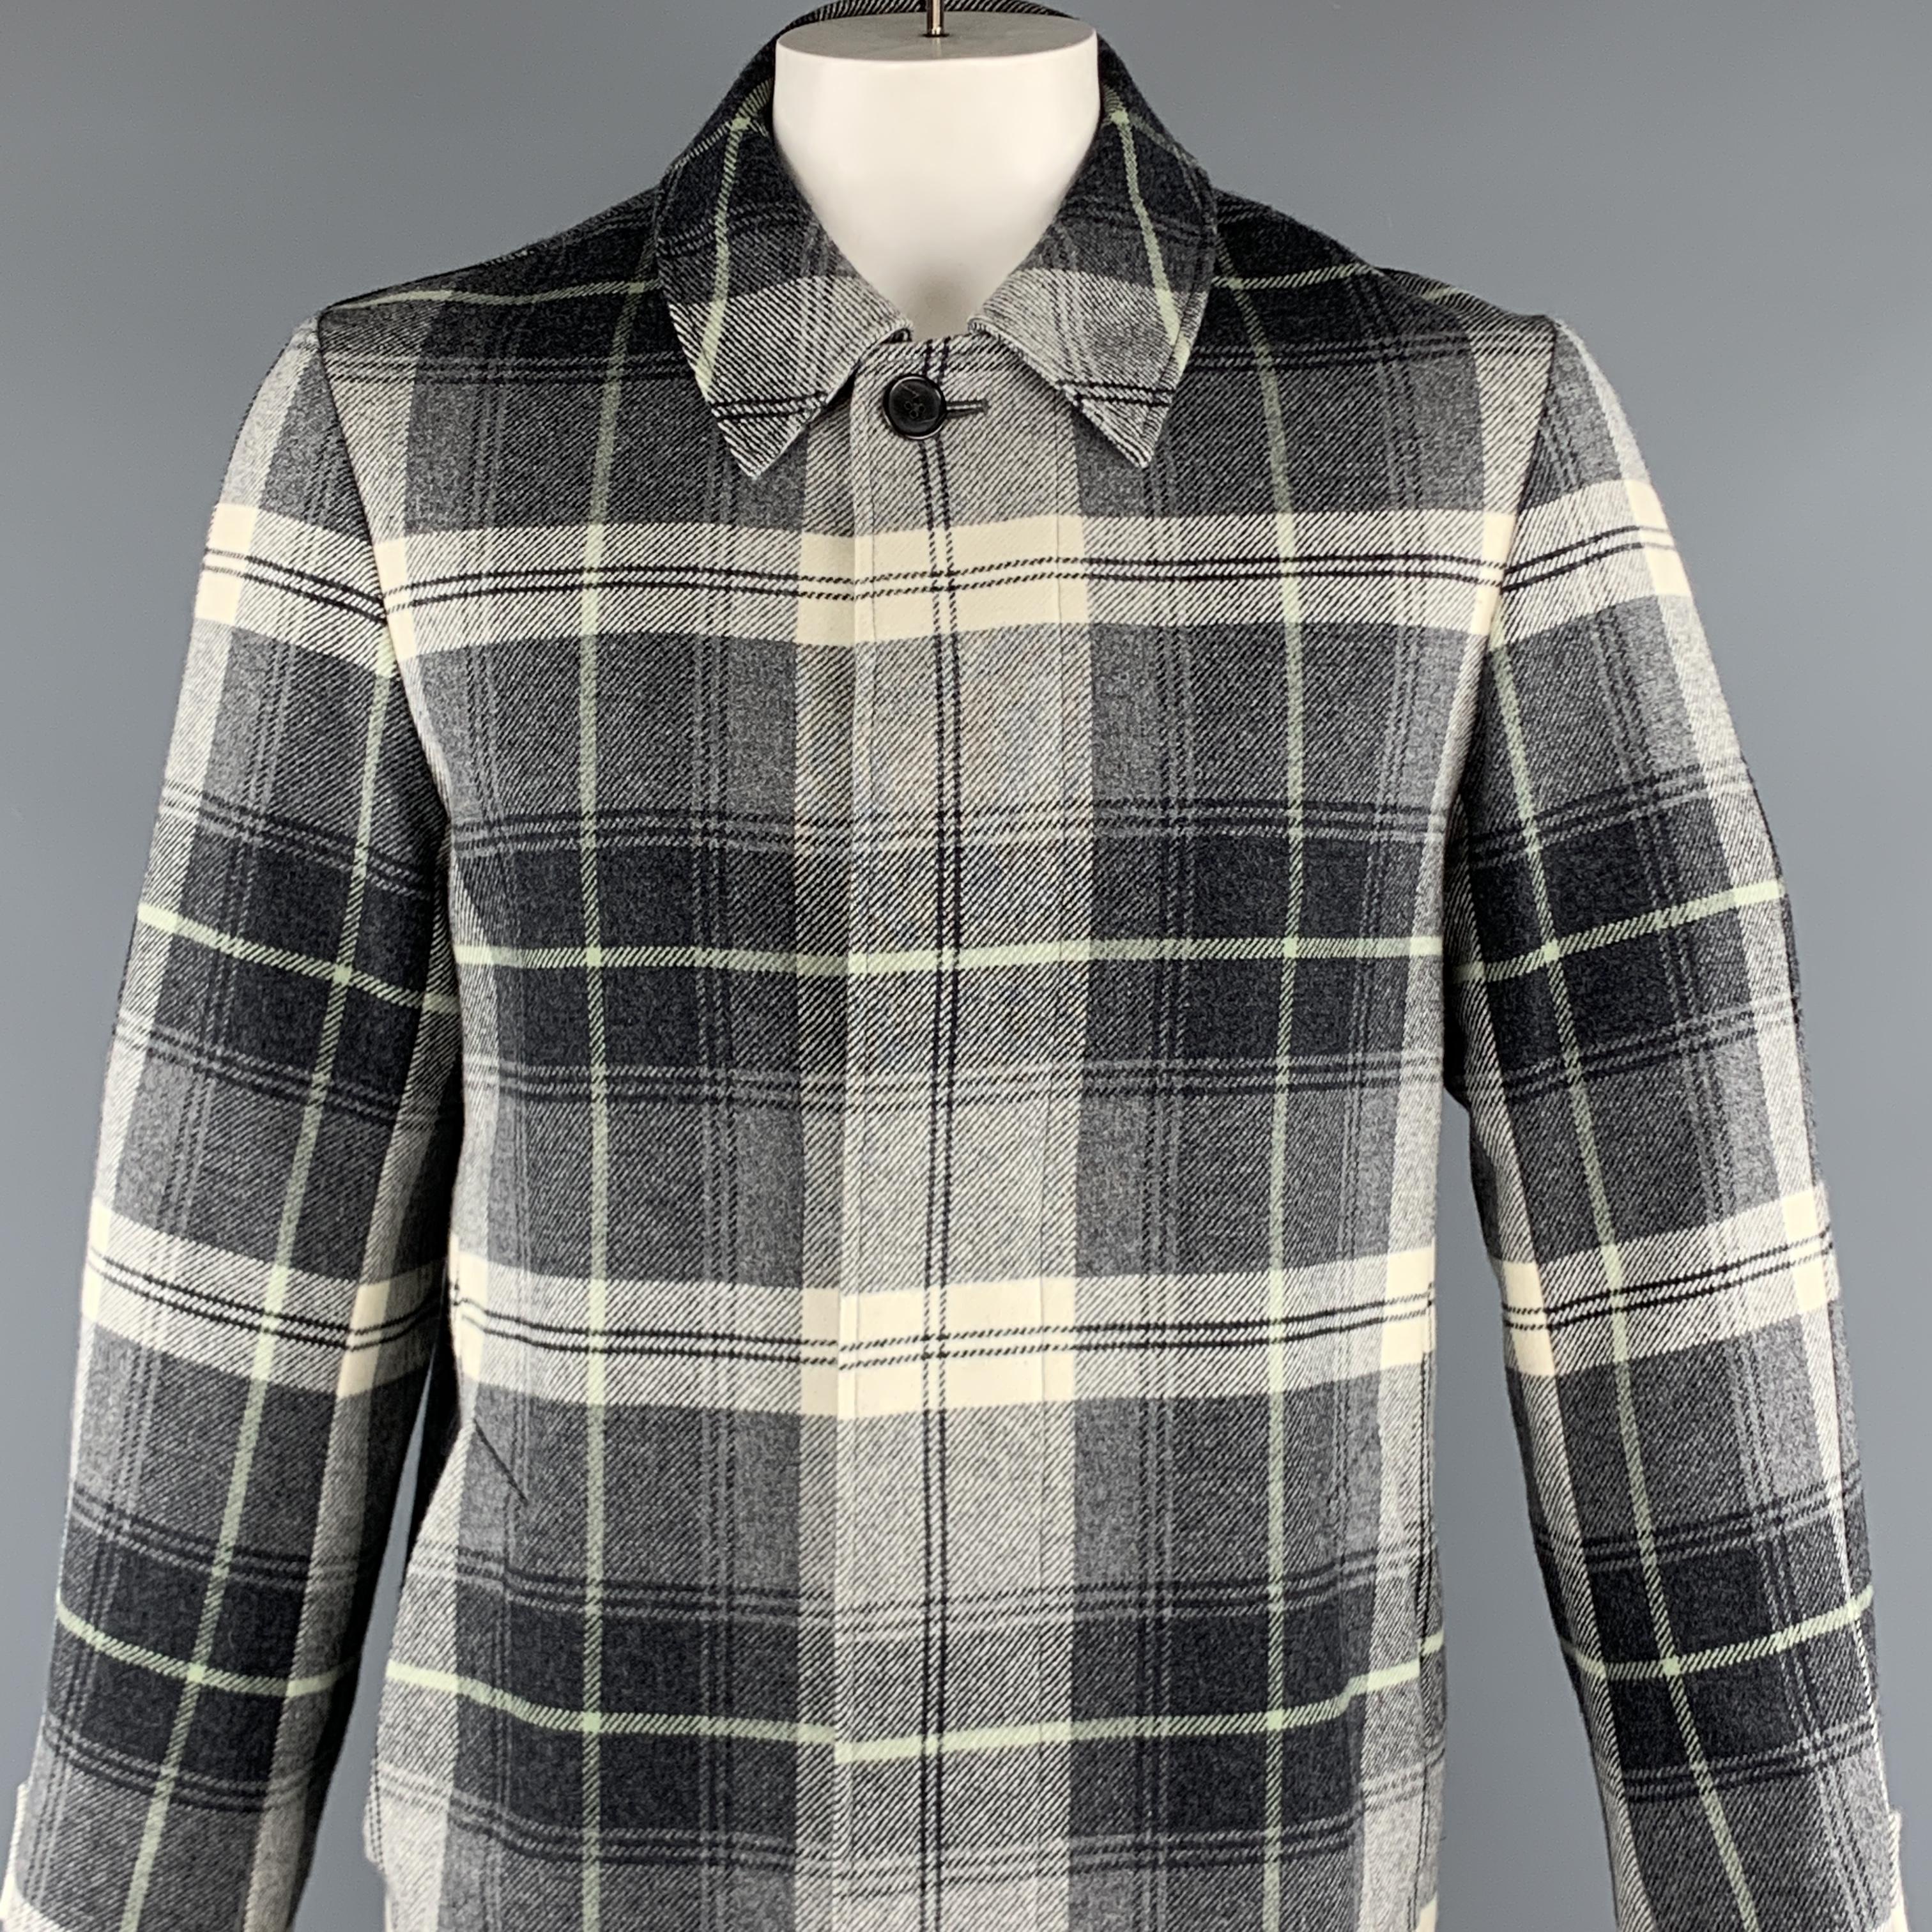 BLACK FLEECE Coat comes in a gray and white plaid wool featuring a hidden button closure, slit pockets, and a spread collar. 

Excellent Pre-Owned Condition.
Marked: BB3

Measurements:

Shoulder: 19 in. 
Chest: 42 in. 
Sleeve: 26 in. 
Length: 39 in. 